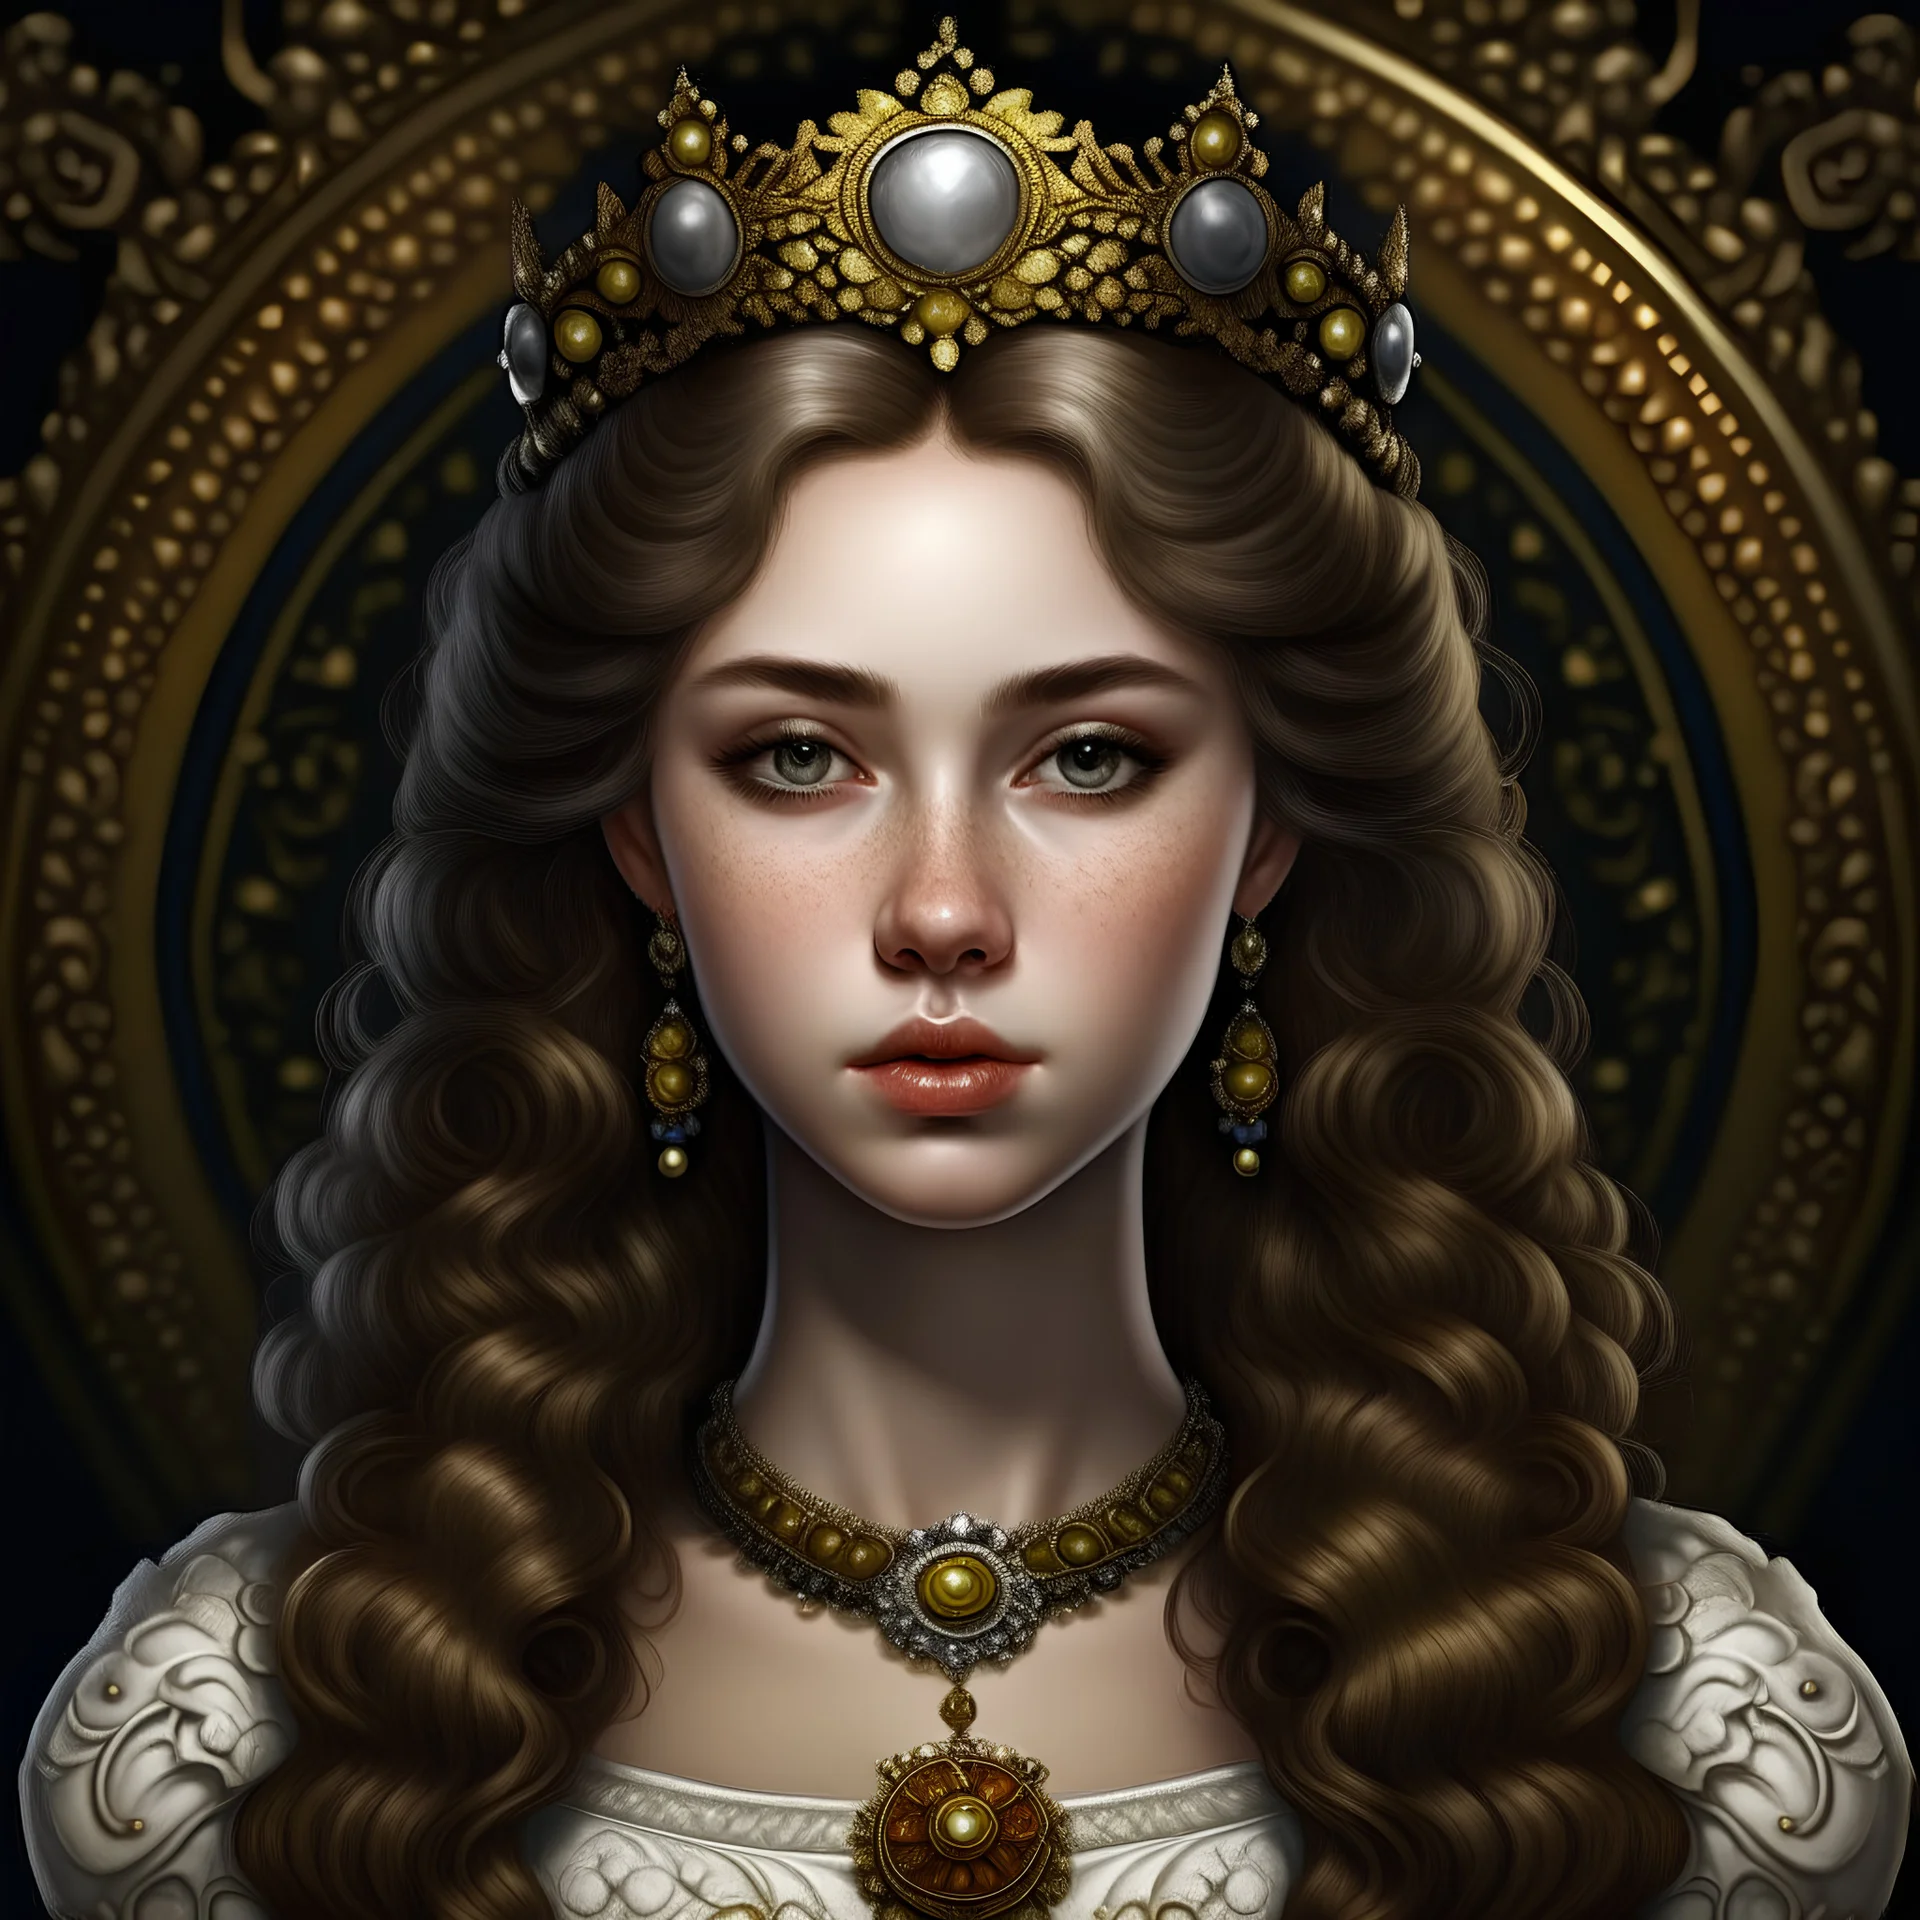 hyper realistic queen woman with black eyes, white skin, long curly brown hair from the front, inside a circle, epic royal background, big royal uncropped crown, royal jewelry